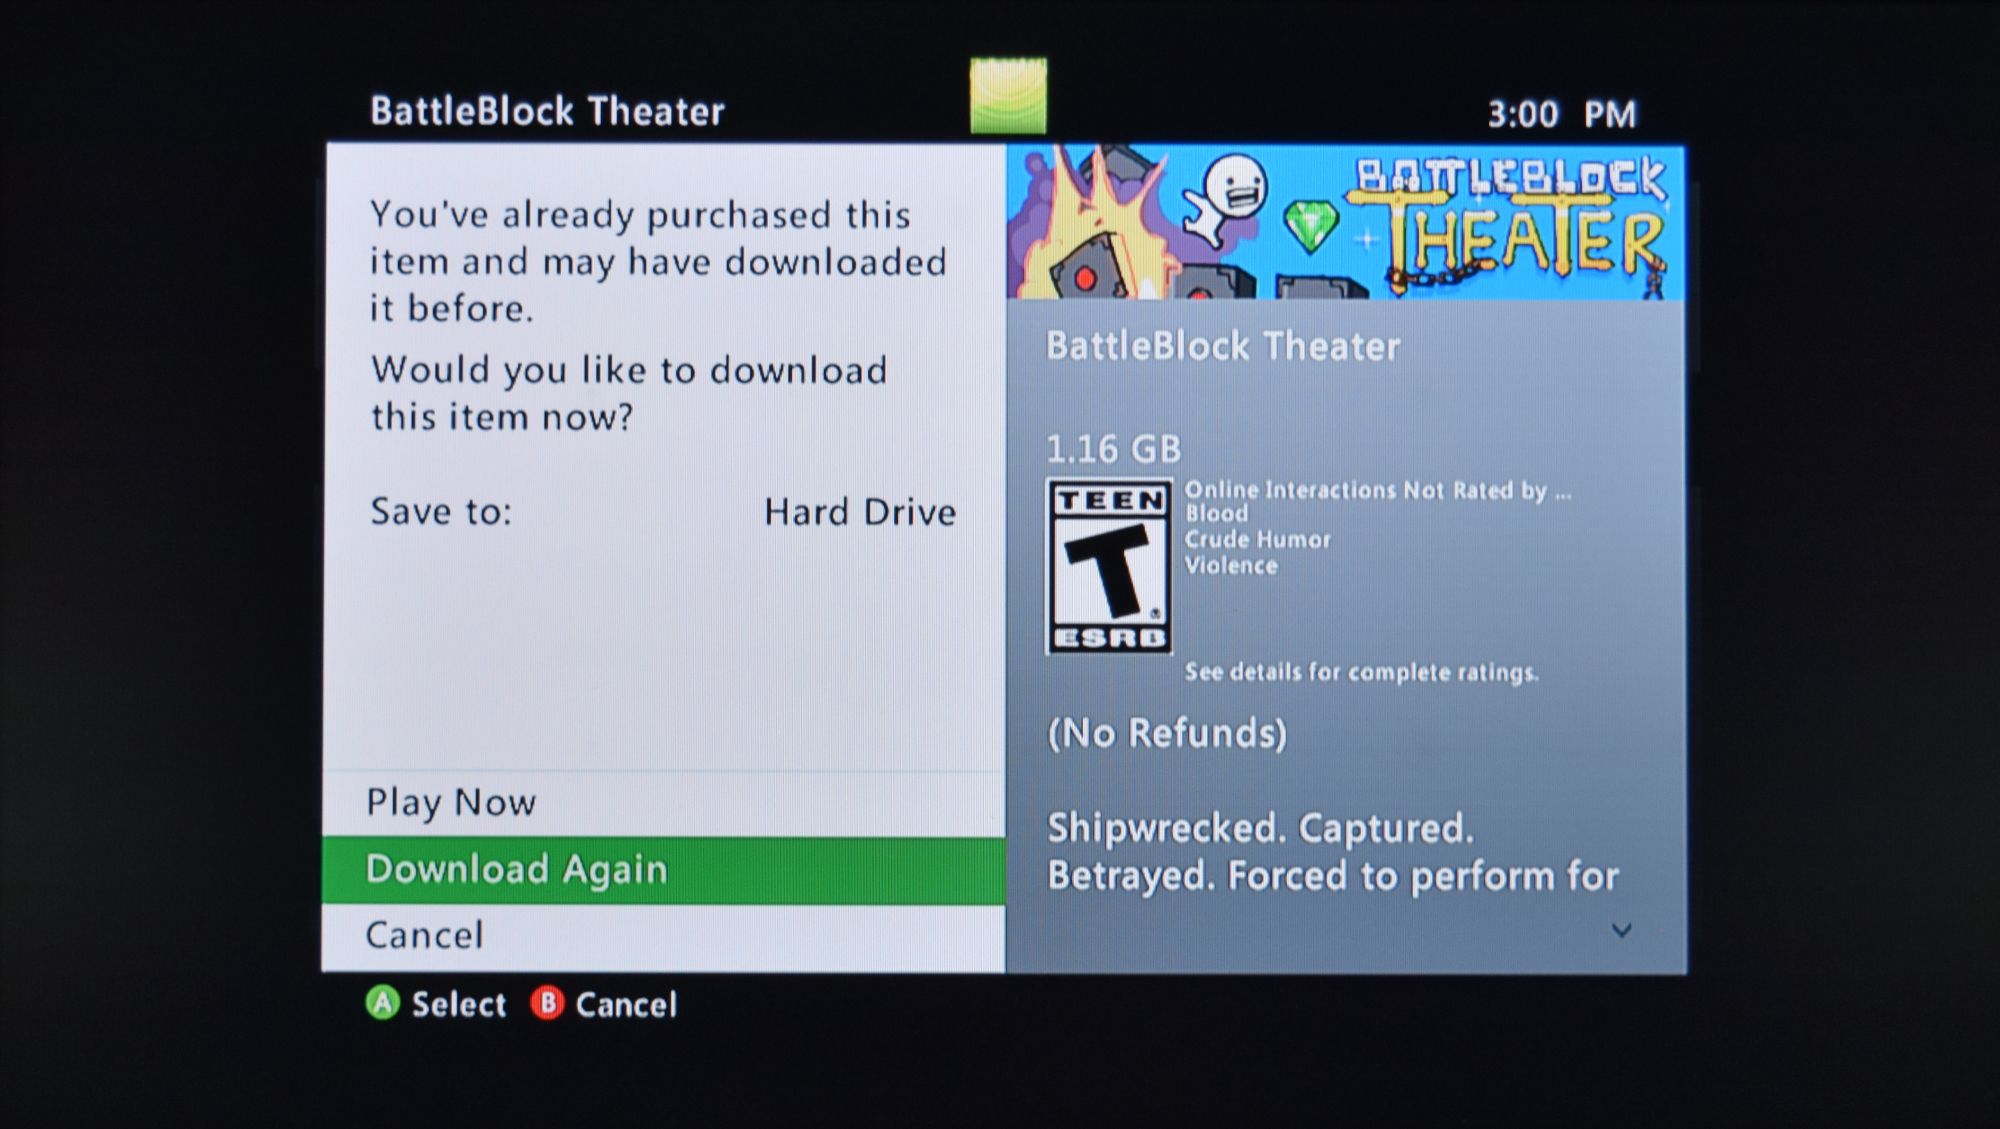 The download screen for BattleBlock Theater on the Xbox 360, with "Download Again" selected.